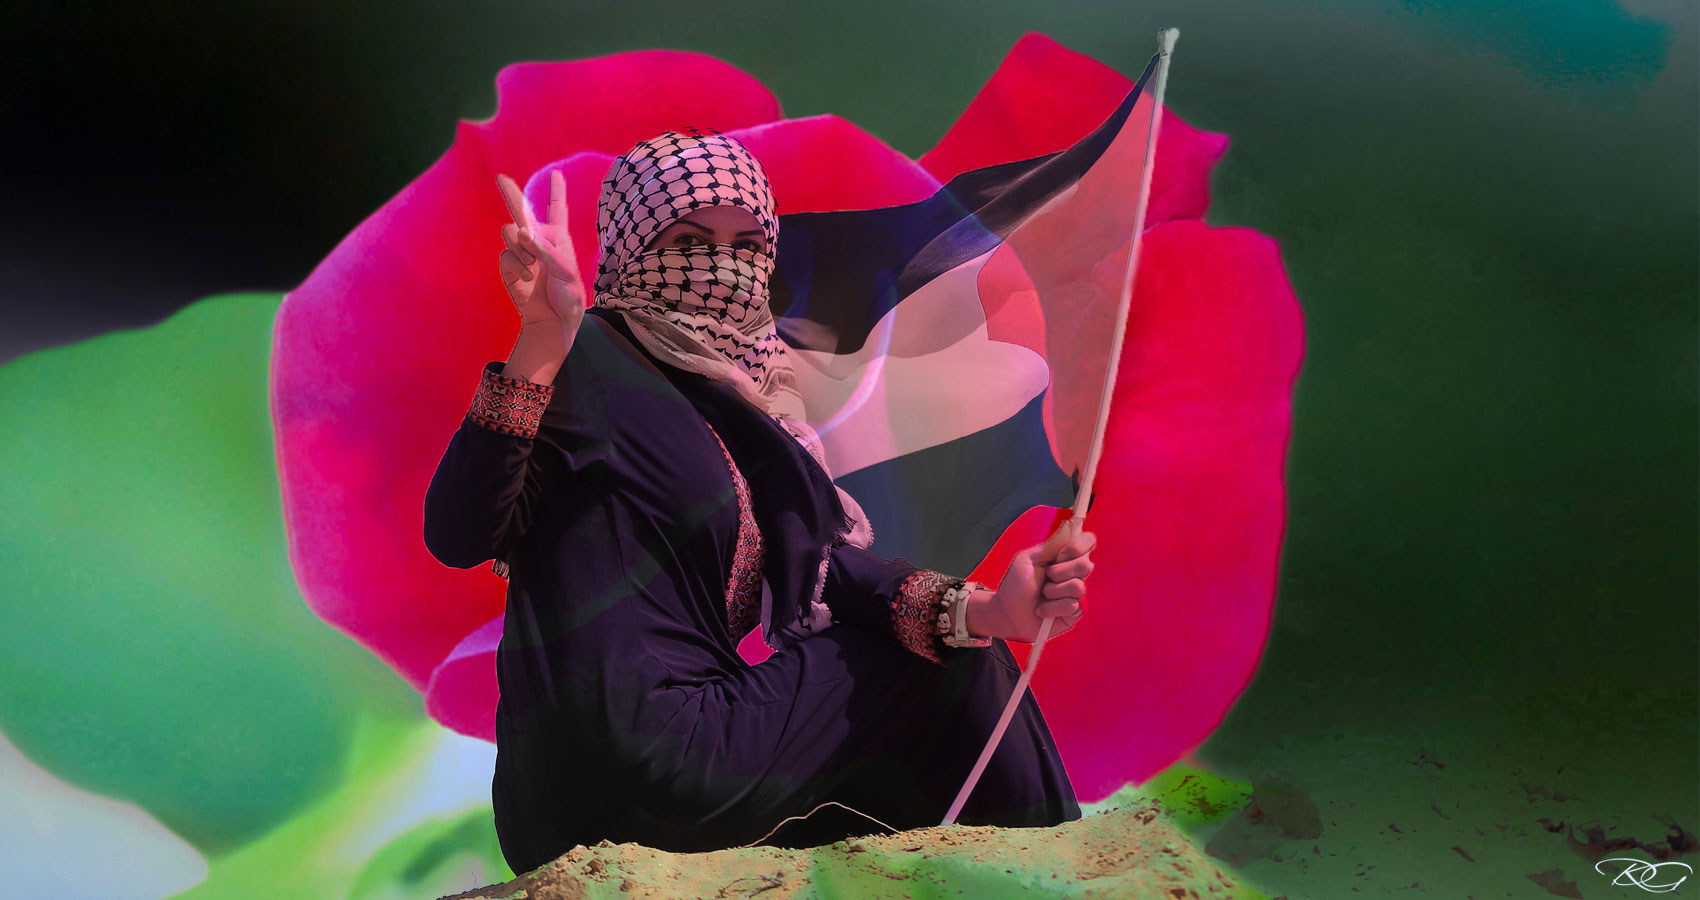 A Rose For Gaza, a poem written by Lynn White at Spillwords.com